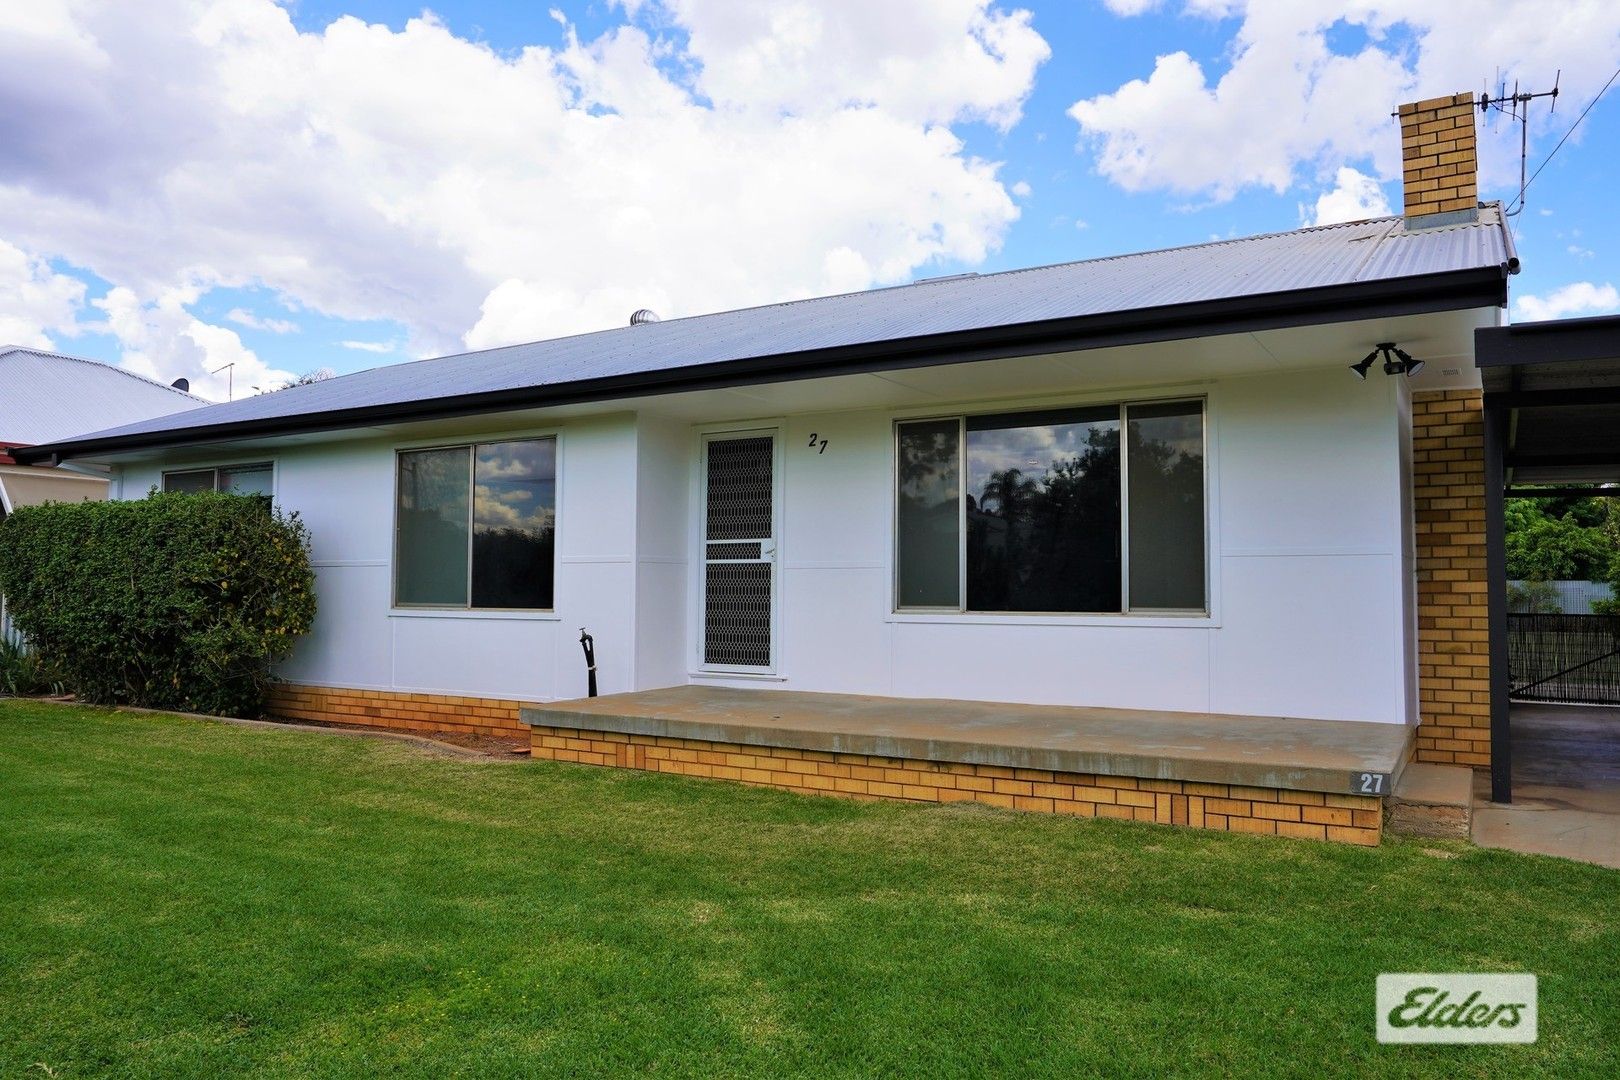 3 bedrooms House in 27 Lawson Crescent GRIFFITH NSW, 2680